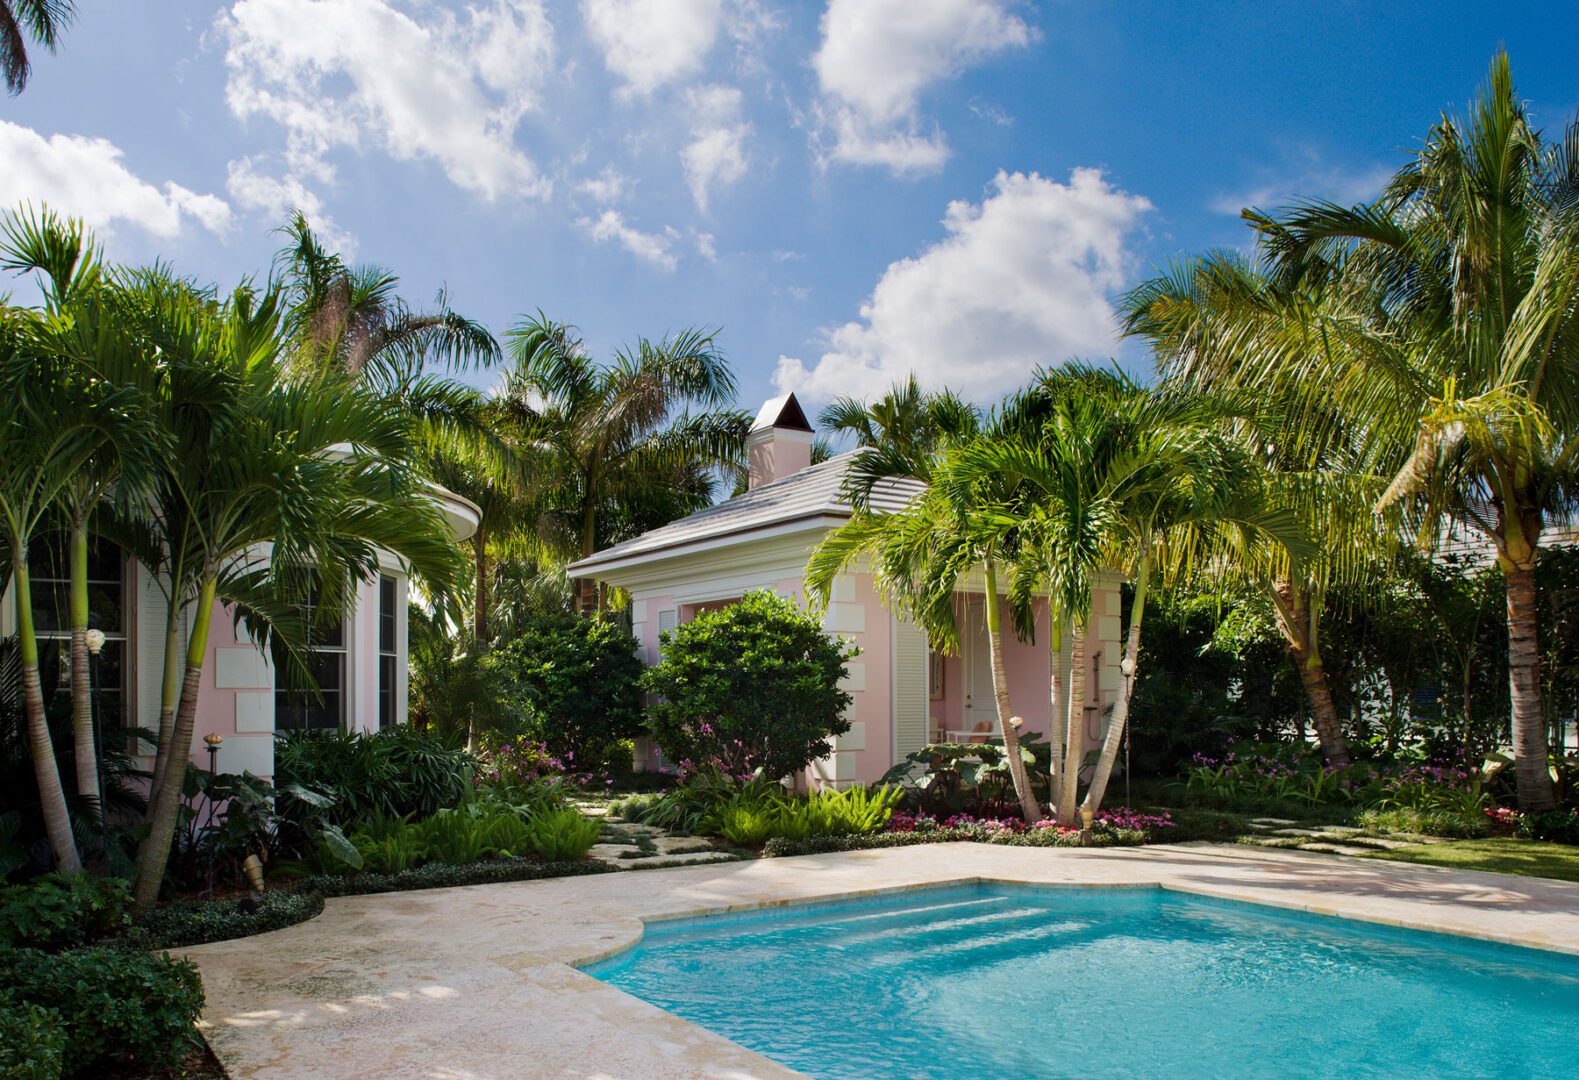 A pool with palm trees and bushes in the background.